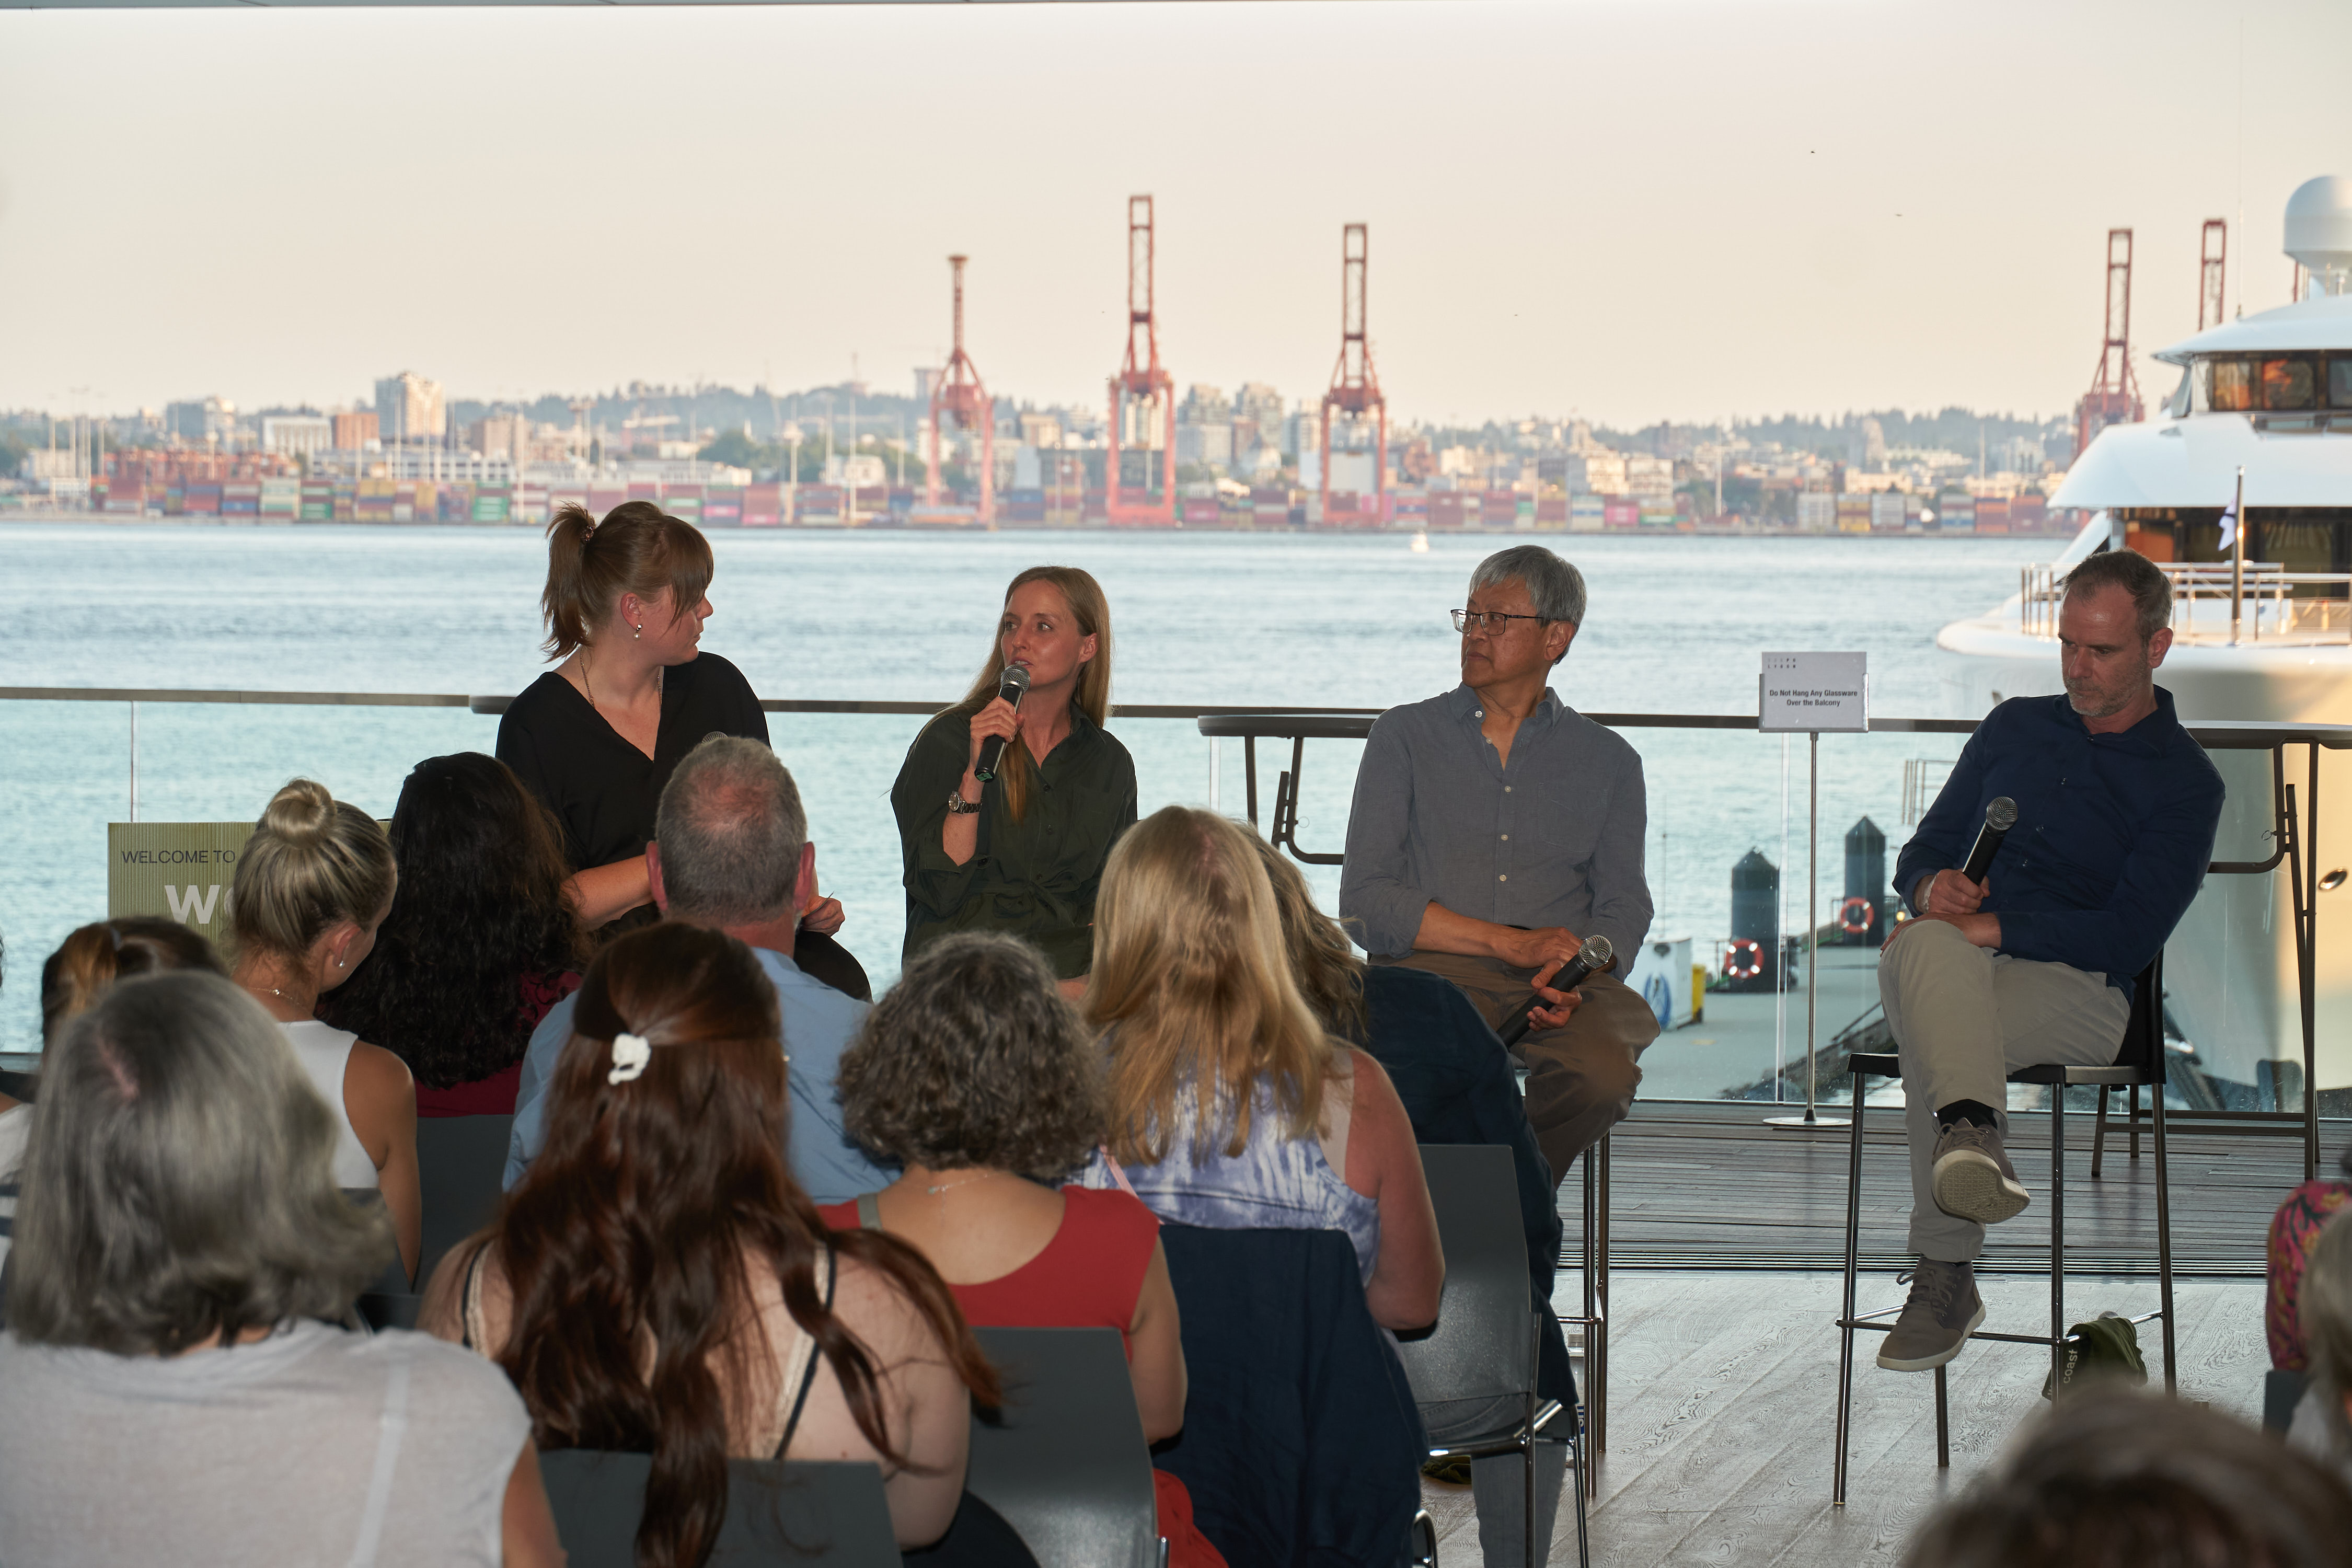 People answering questions from an audience with the harbour in the background